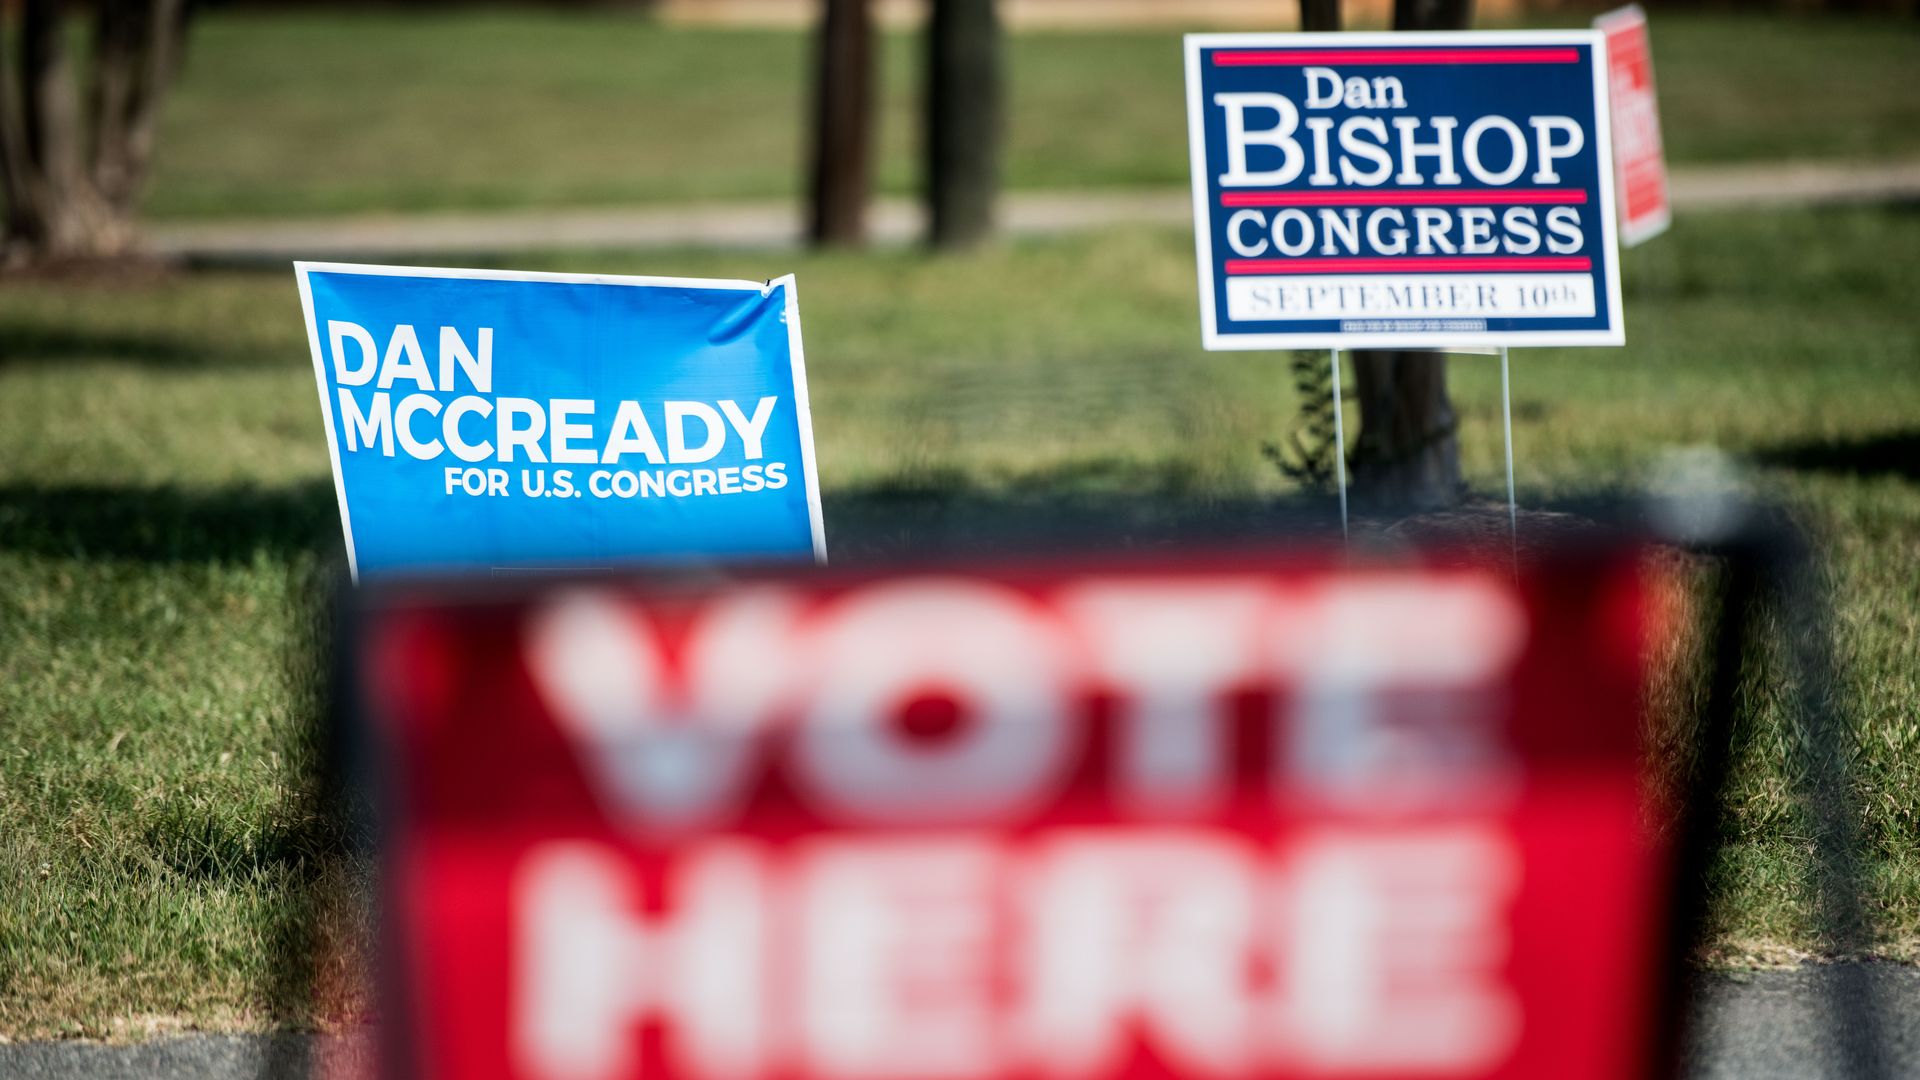 In this image, a blurred "vote here" sign rests in the foreground on a green lawn. Behind that sign, two signs stand next to each other that read "Dan McCready" and "Dan Bishop" 